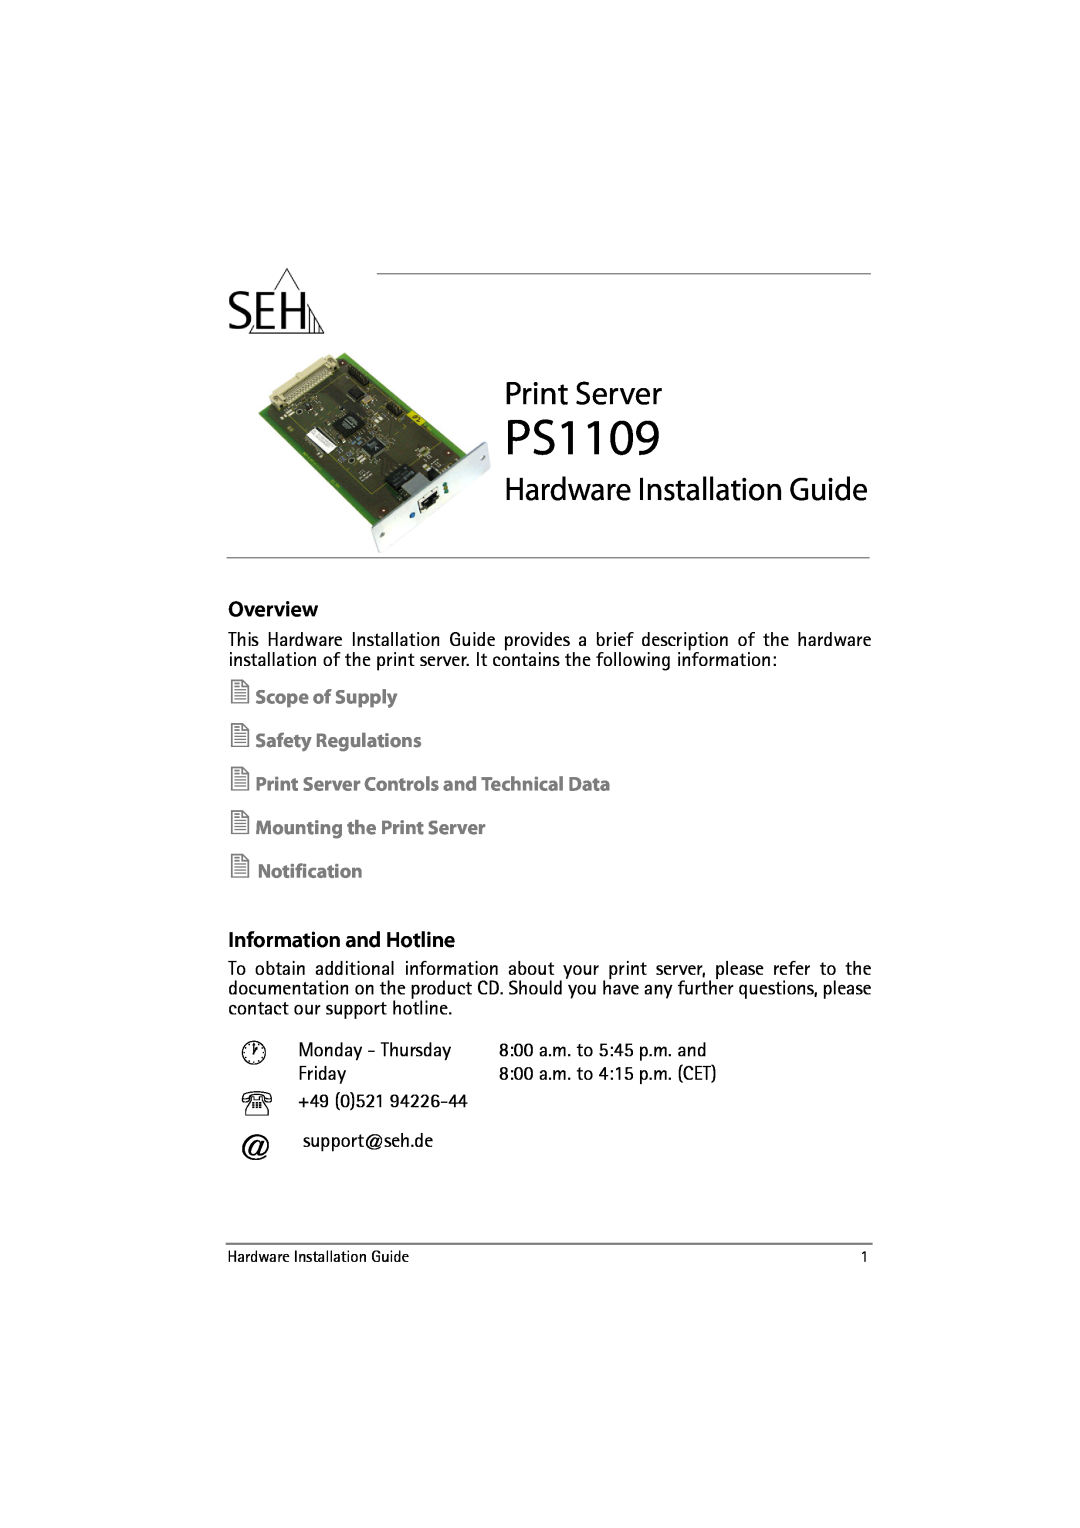 SEH Computertechnik PS1109 manual Overview, Information and Hotline, Print Server, Hardware Installation Guide 